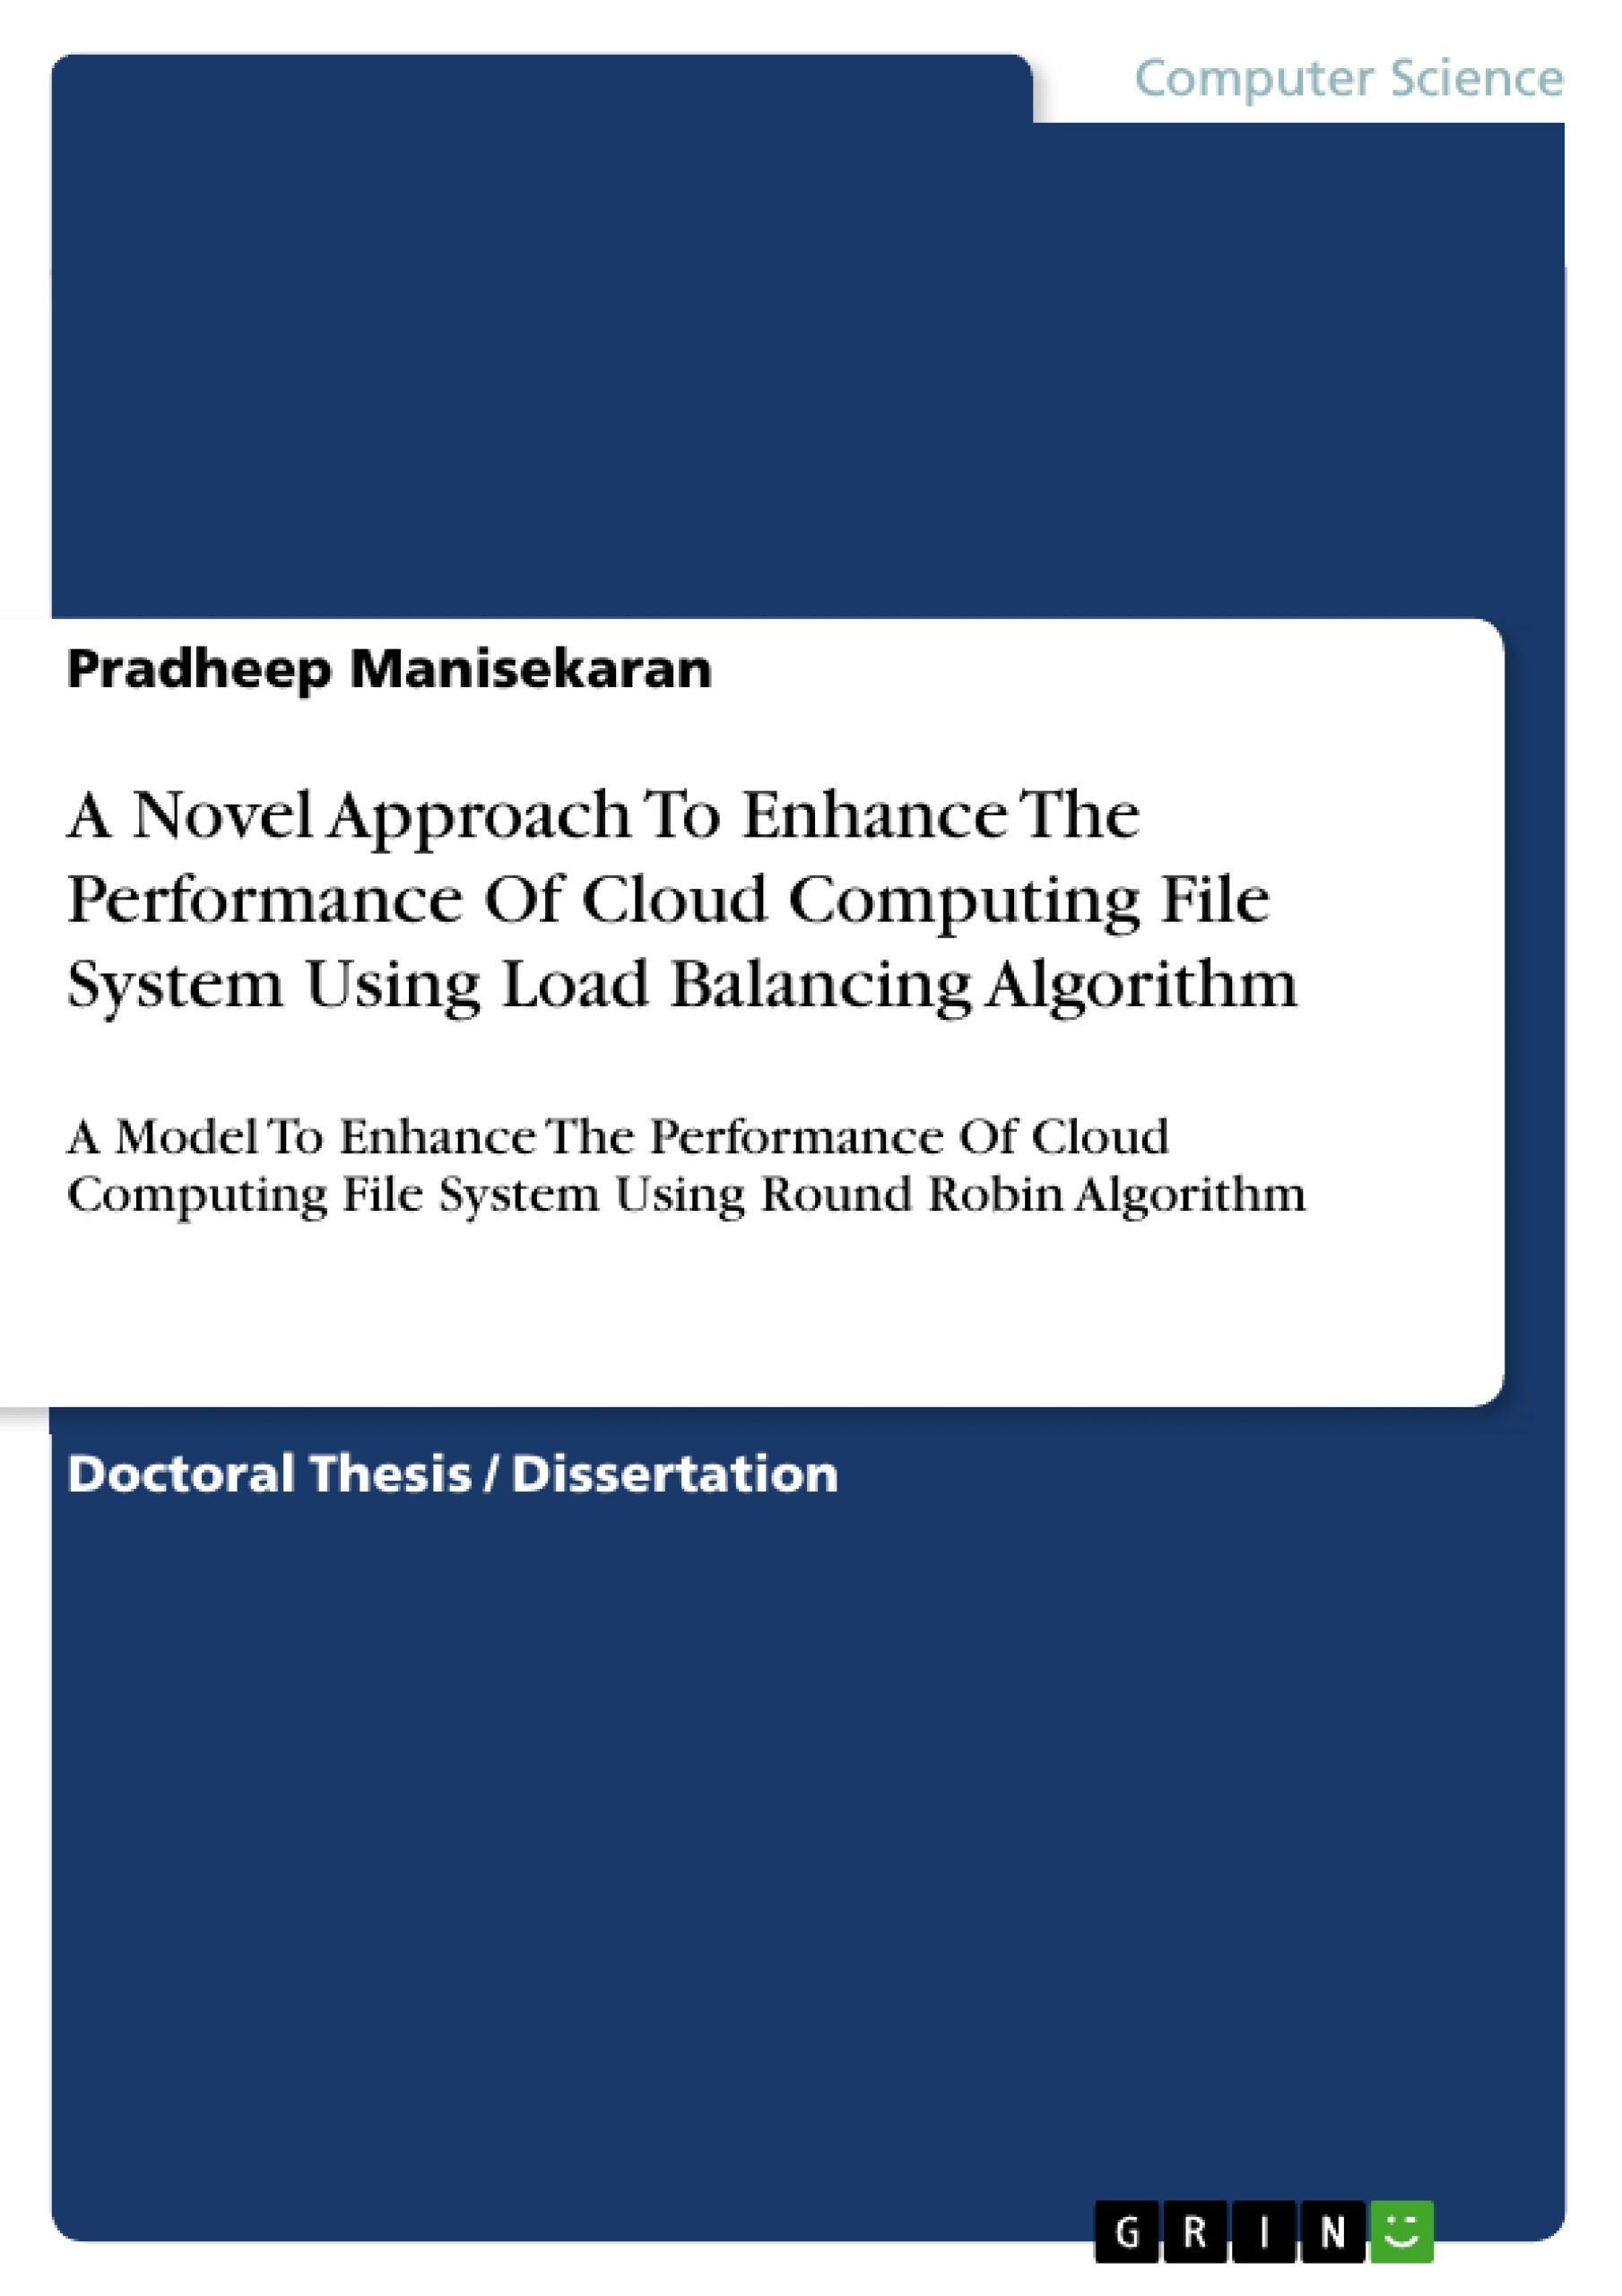 Title: A Novel Approach To Enhance The Performance Of Cloud Computing File System Using Load Balancing Algorithm